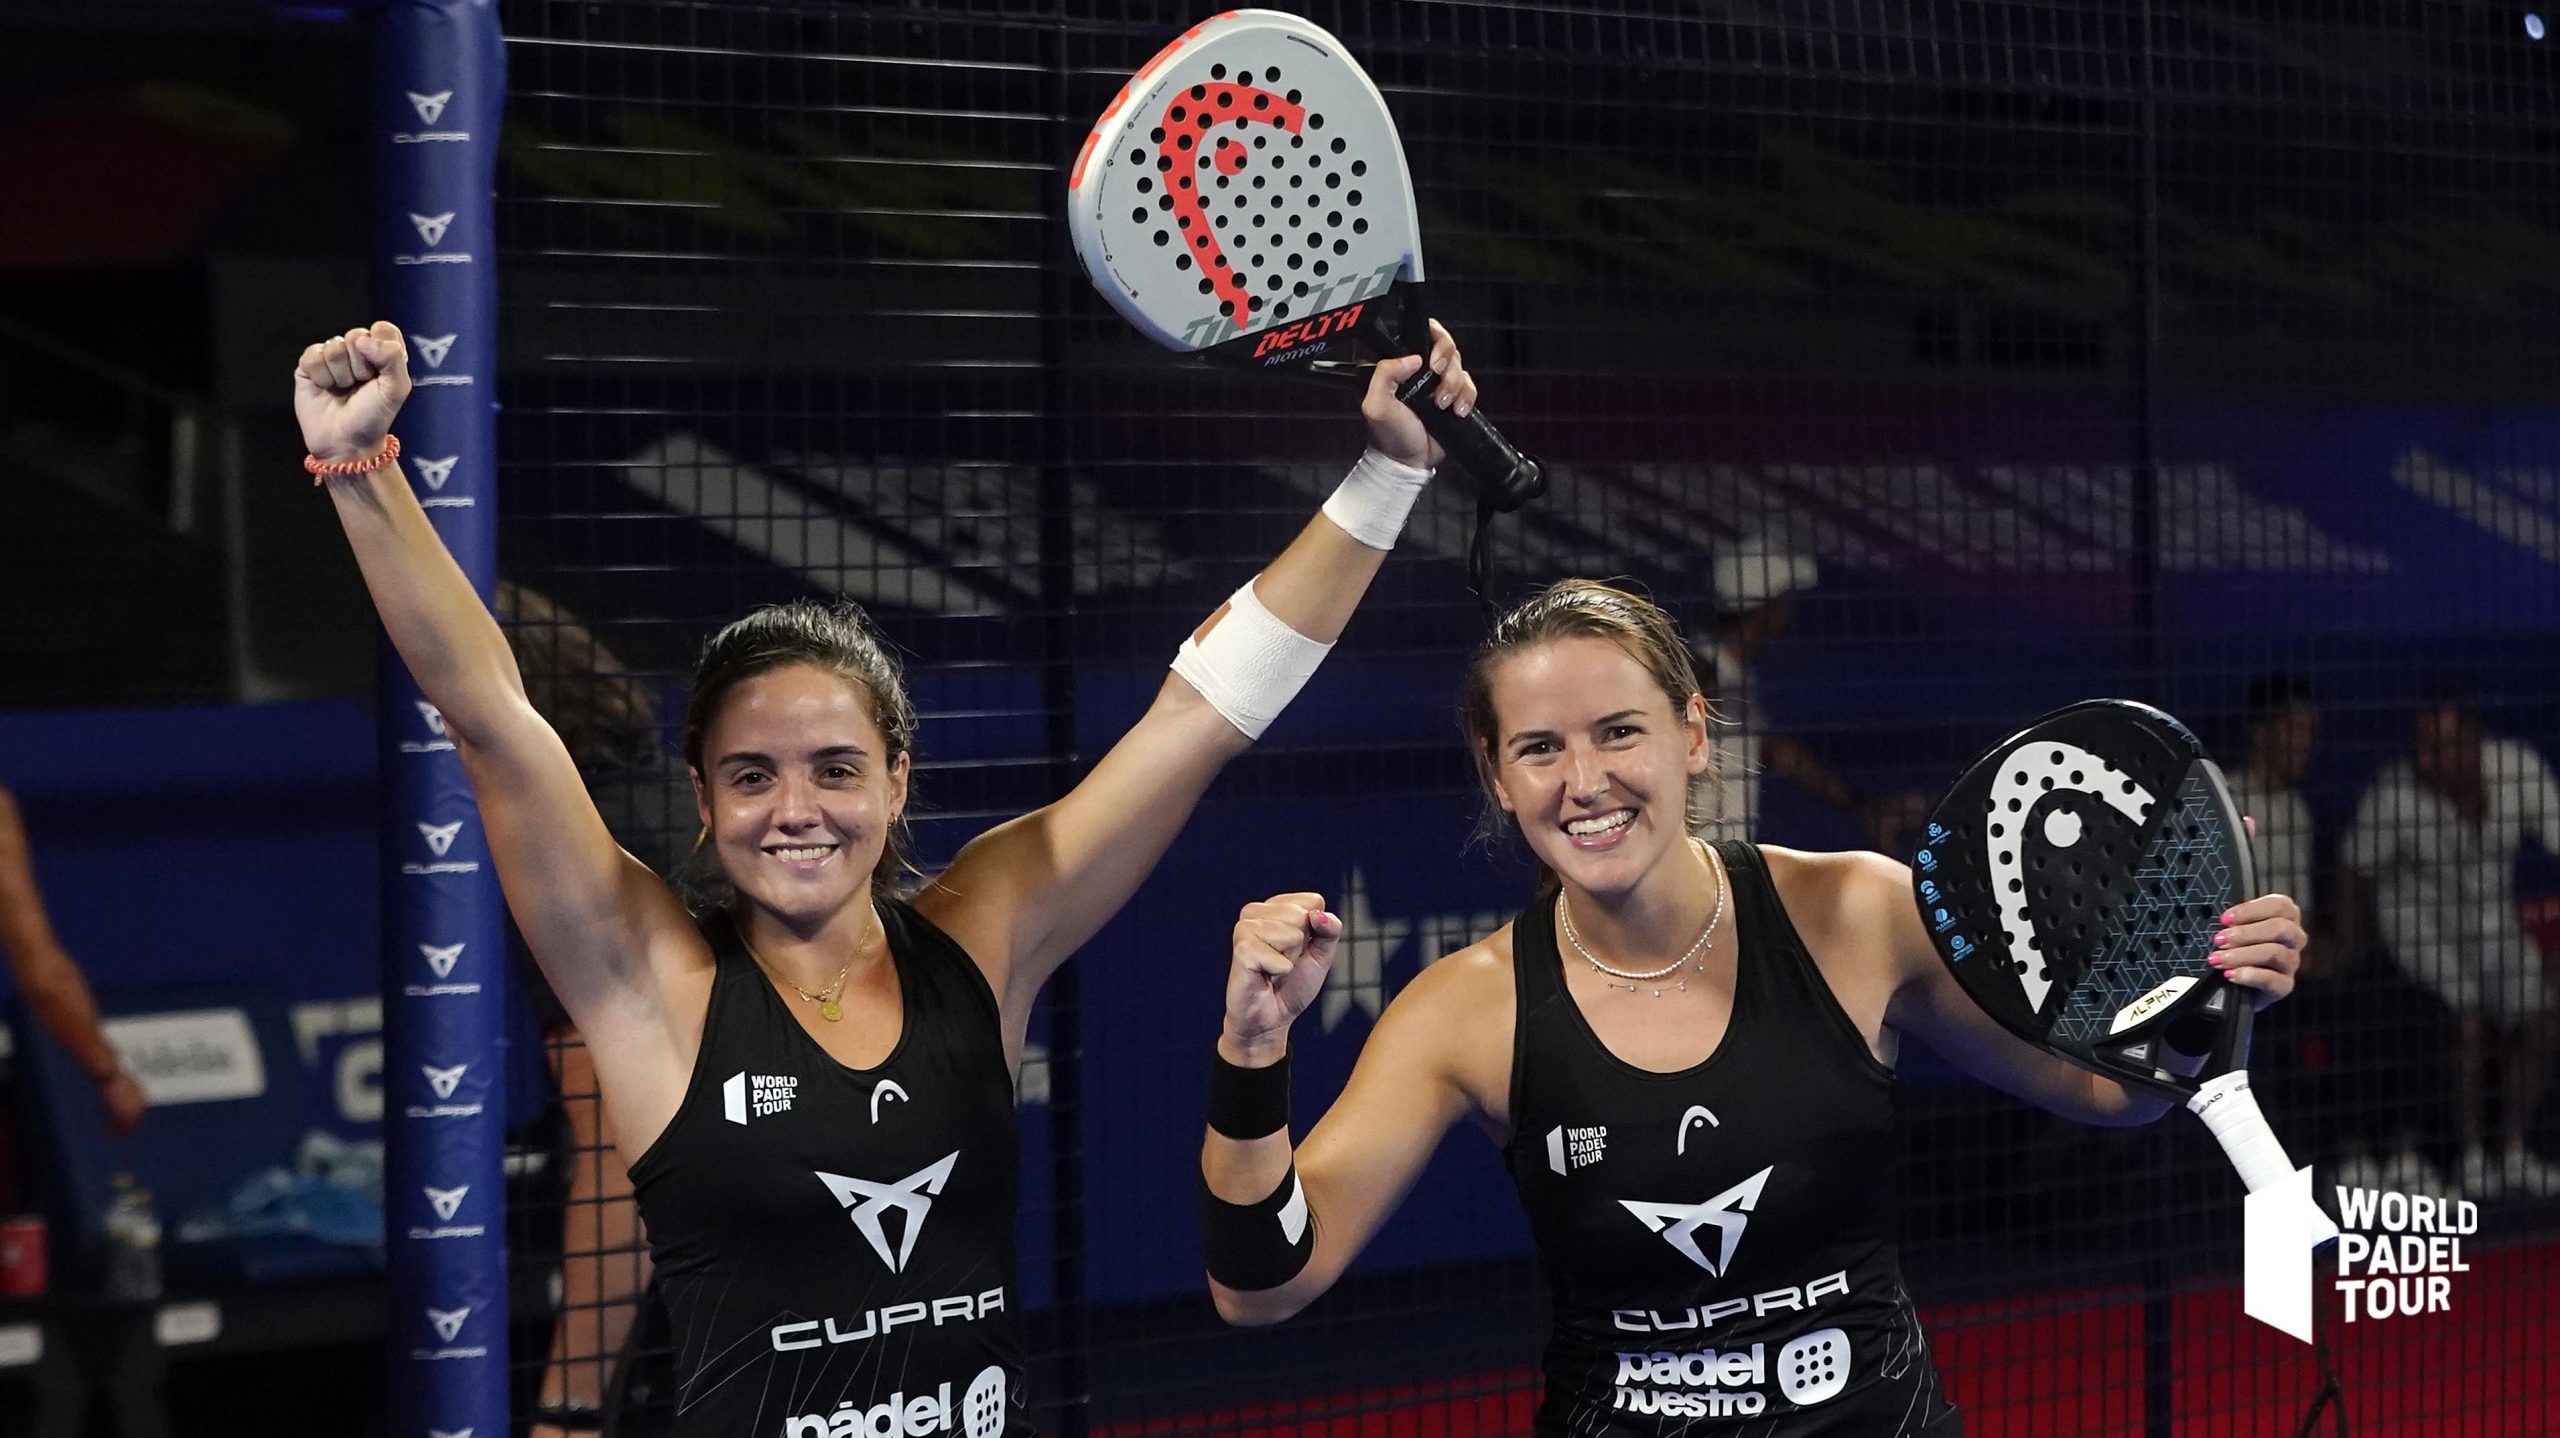 OFFICIAL: Ariana Sánchez and Paula Josemaría the new number ones after Madrid Master!